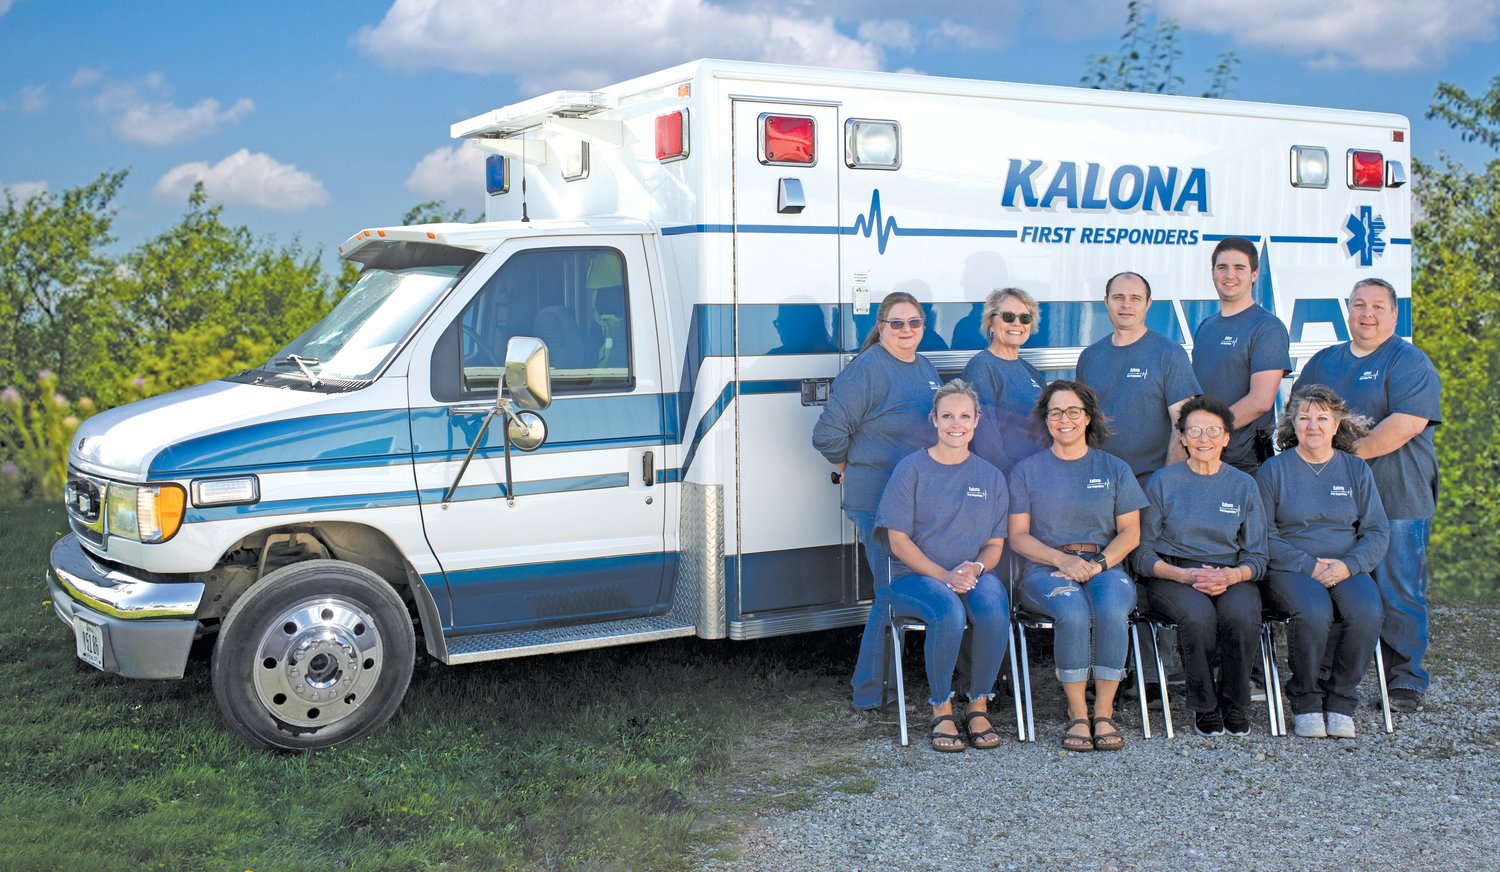 Current members of the Kalona First Responders include-Front Row (left to right): Hayley Hershberger, Shelly Bontrager, Ethel Bontrager, Lori Chalupa. Back Row: Pam Pacha, Regina Choate, Eldon Helmuth, Hogan Miller and director Aaron Gingerich. Not Present: Amber Kral, Brent Jehle, Chad Scarff, Dean Miller, Jerry Zahradnek, Jessie Zahradnek, Maddie Zahradnek, Traci Zahradnek, Karma Mack, Margo Duwa, Michelle Gardner, Merv Miller and Tim Smith. KFR covers 80 sq. mi. We had a low in 2018 of 258 calls with a steady increase of: 298 in 2019, 305 in 2020, 313 in 2021. From Jan- to April of this year there have been 113 calls,  trending to have over 300 in 2022 as well.